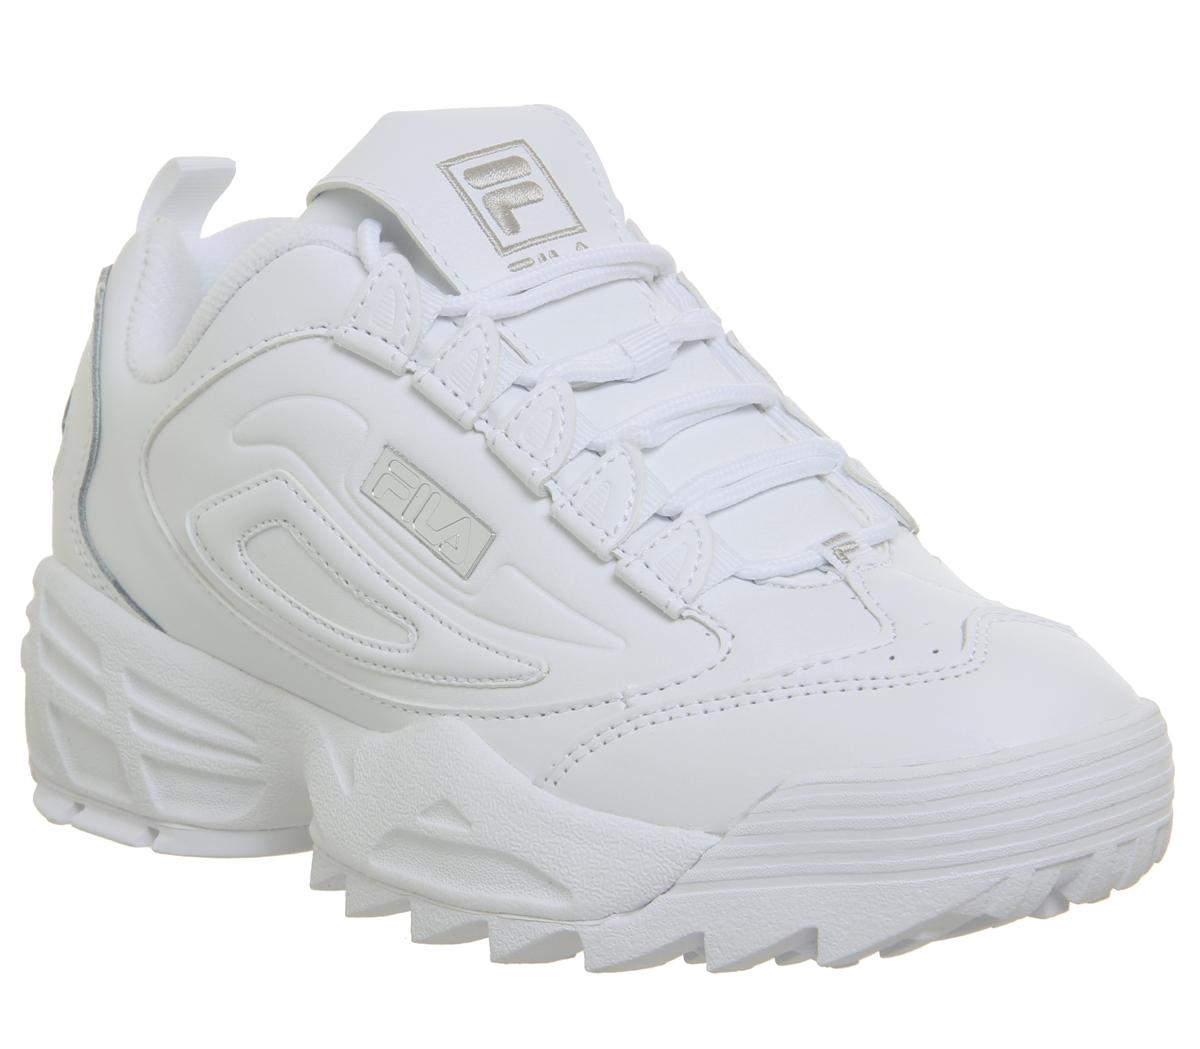 Fila Disruptor 3 Trainers White - Hers 